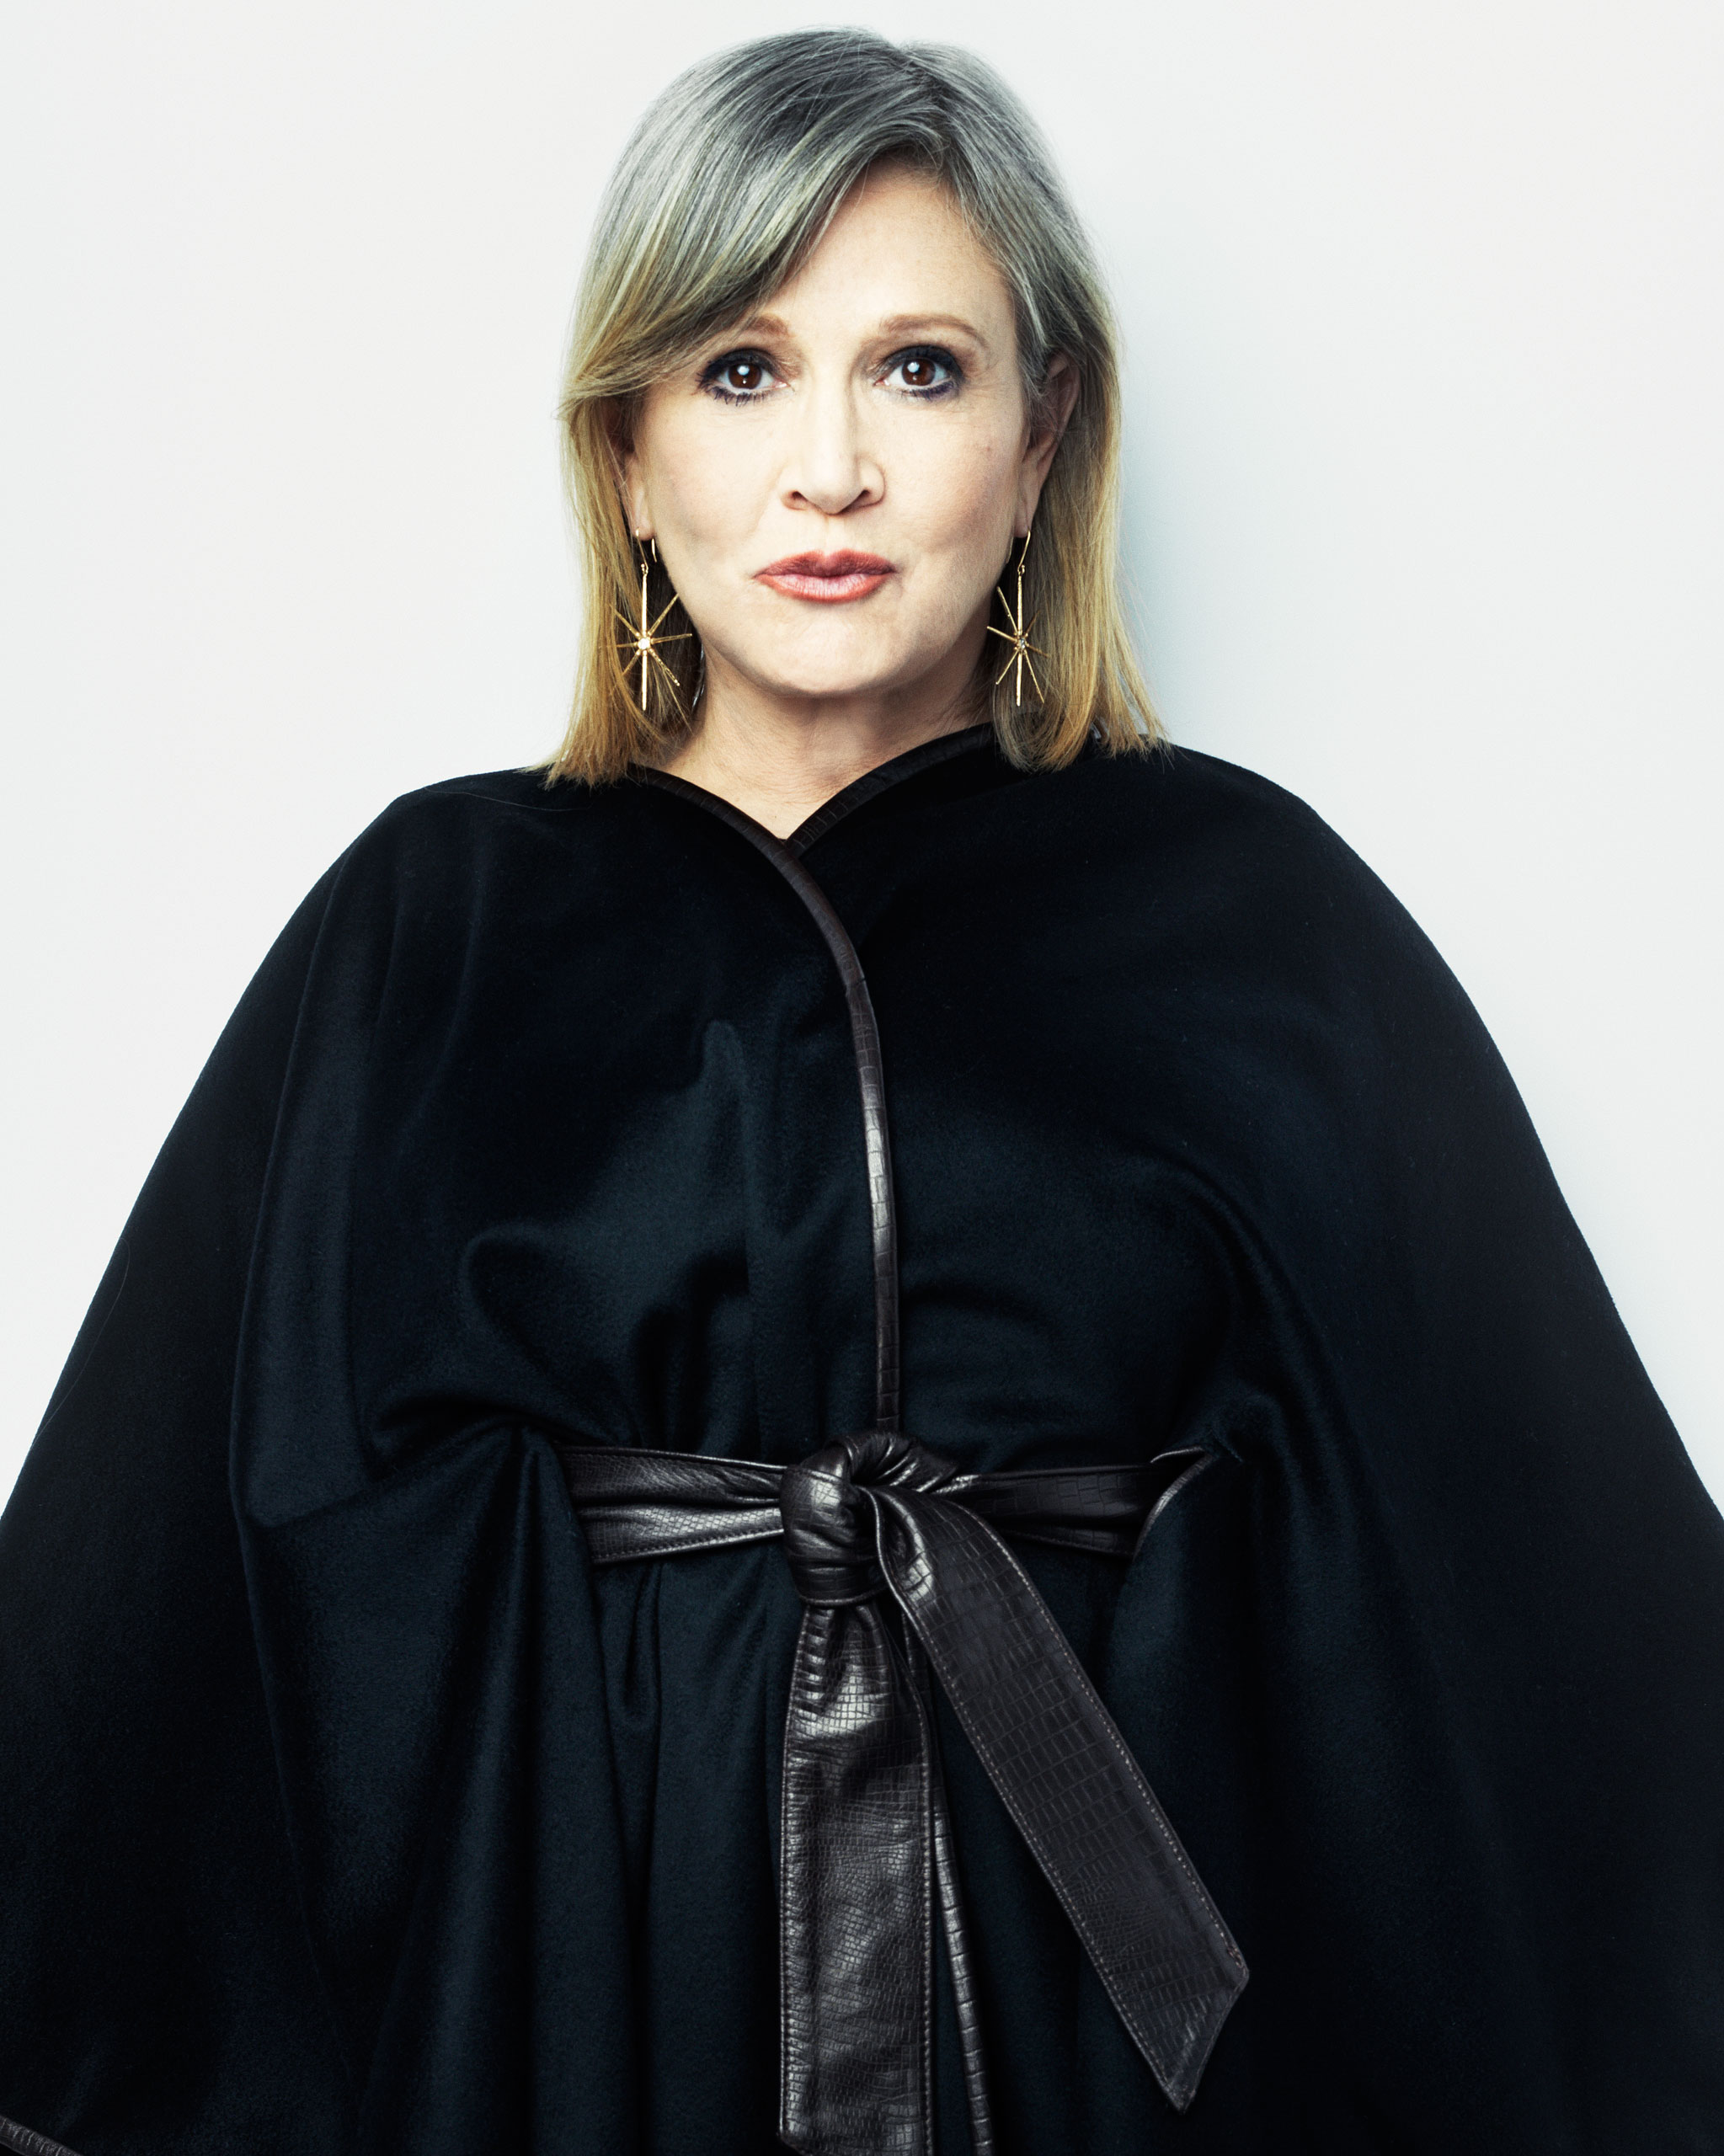 Carrie Fisher photographed for TIME on October 27, 2015 in Los Angeles.